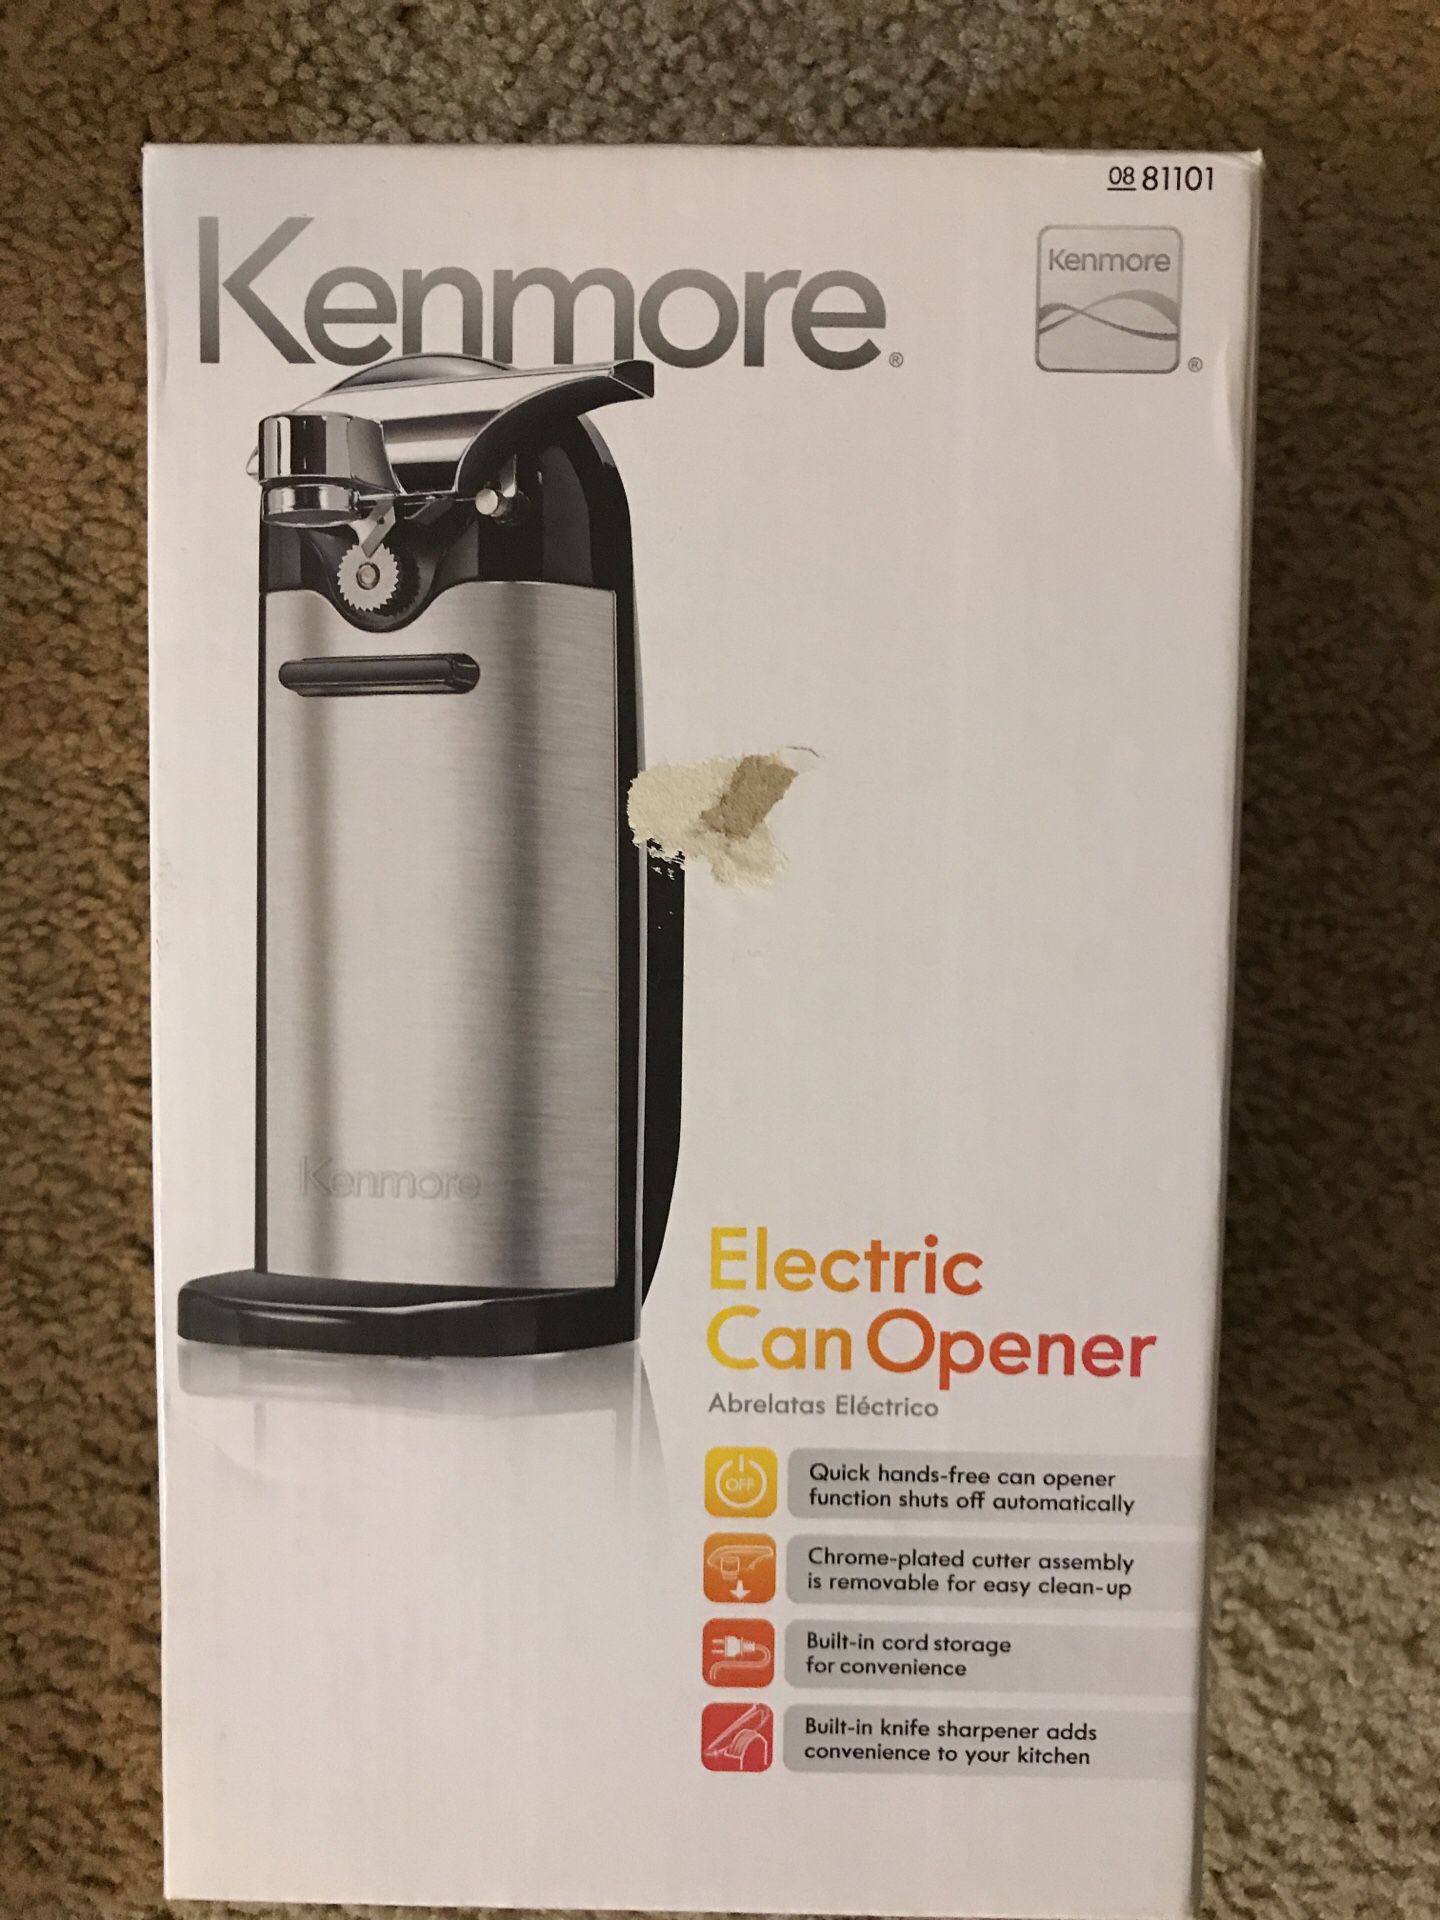 Kenmore electronic can opener